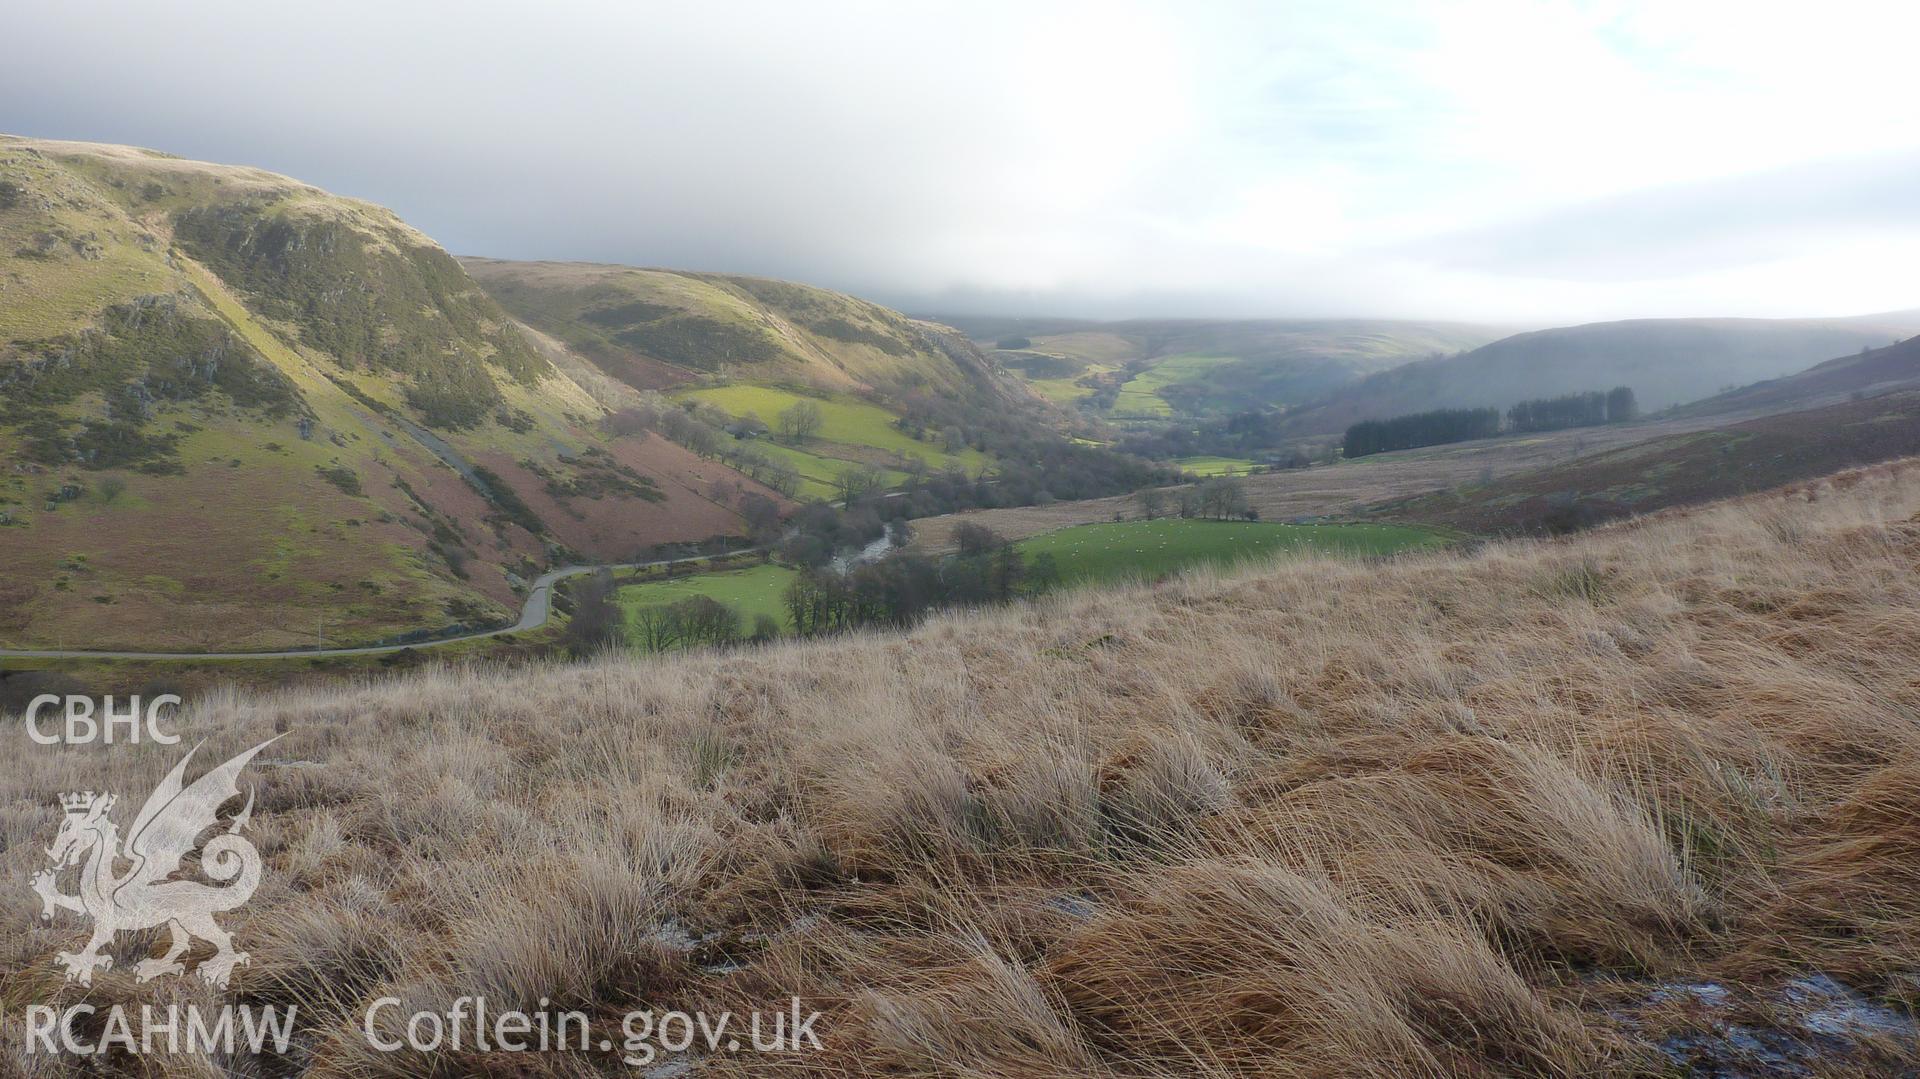 View from Cerrig Llwydion deserted rural settlement looking south east down valley & penstock route. Photographed for Archaeological Desk Based Assessment of Afon Claerwen, Elan Valley, Rhayader. Assessment by Archaeology Wales, 2017-18. Project no. 2573.